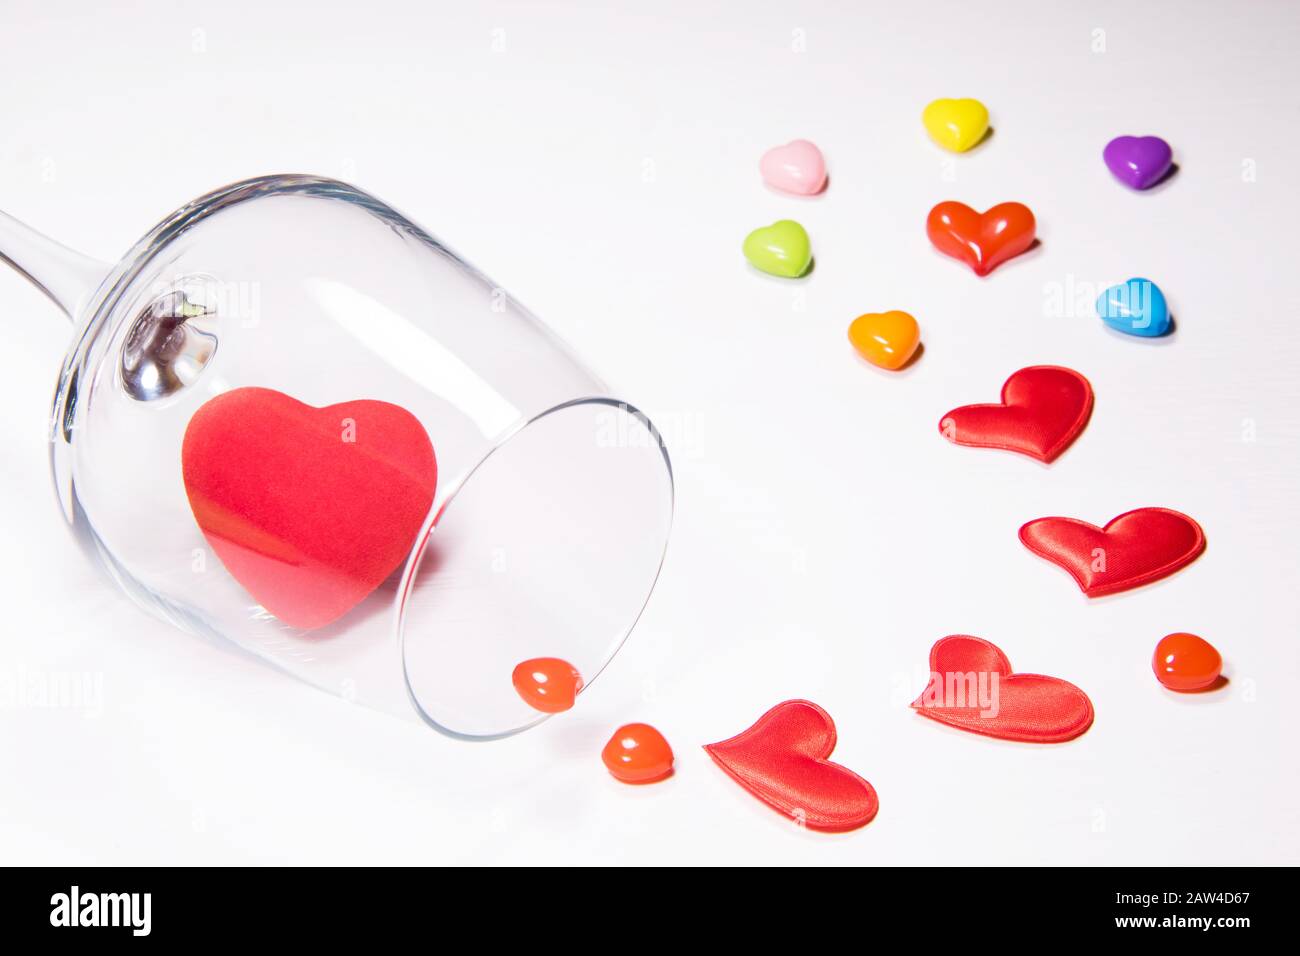 From the inverted glass drop out colorful hearts on white background Stock Photo